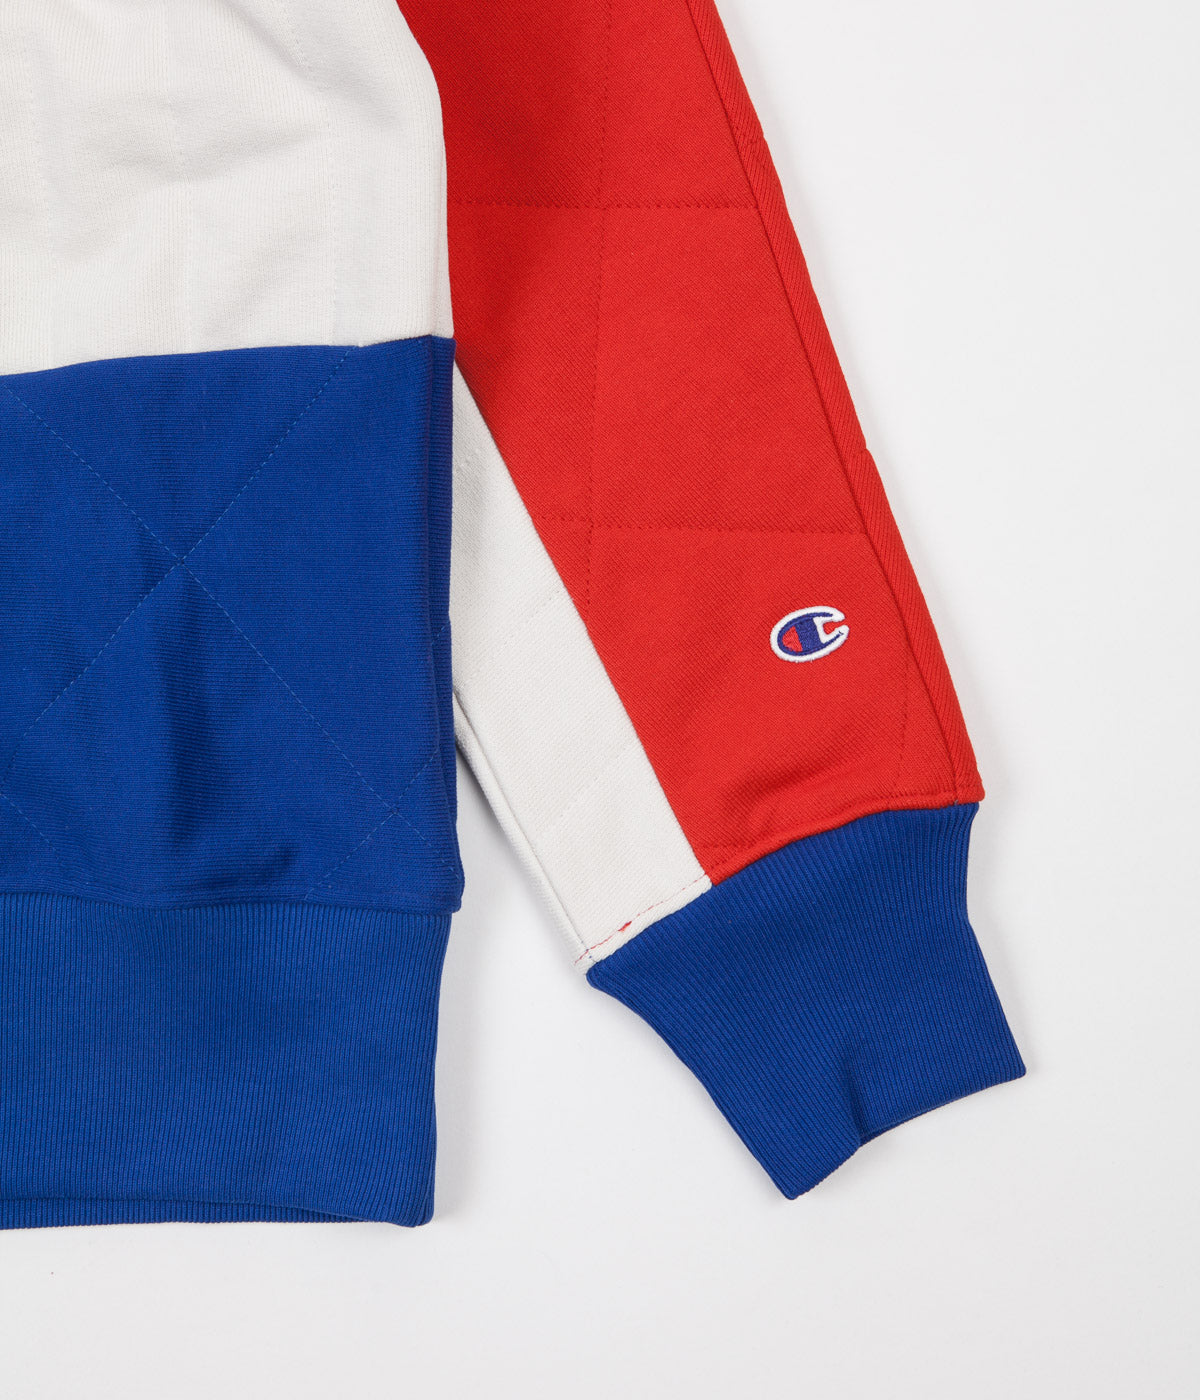 red white and blue champion hoodie